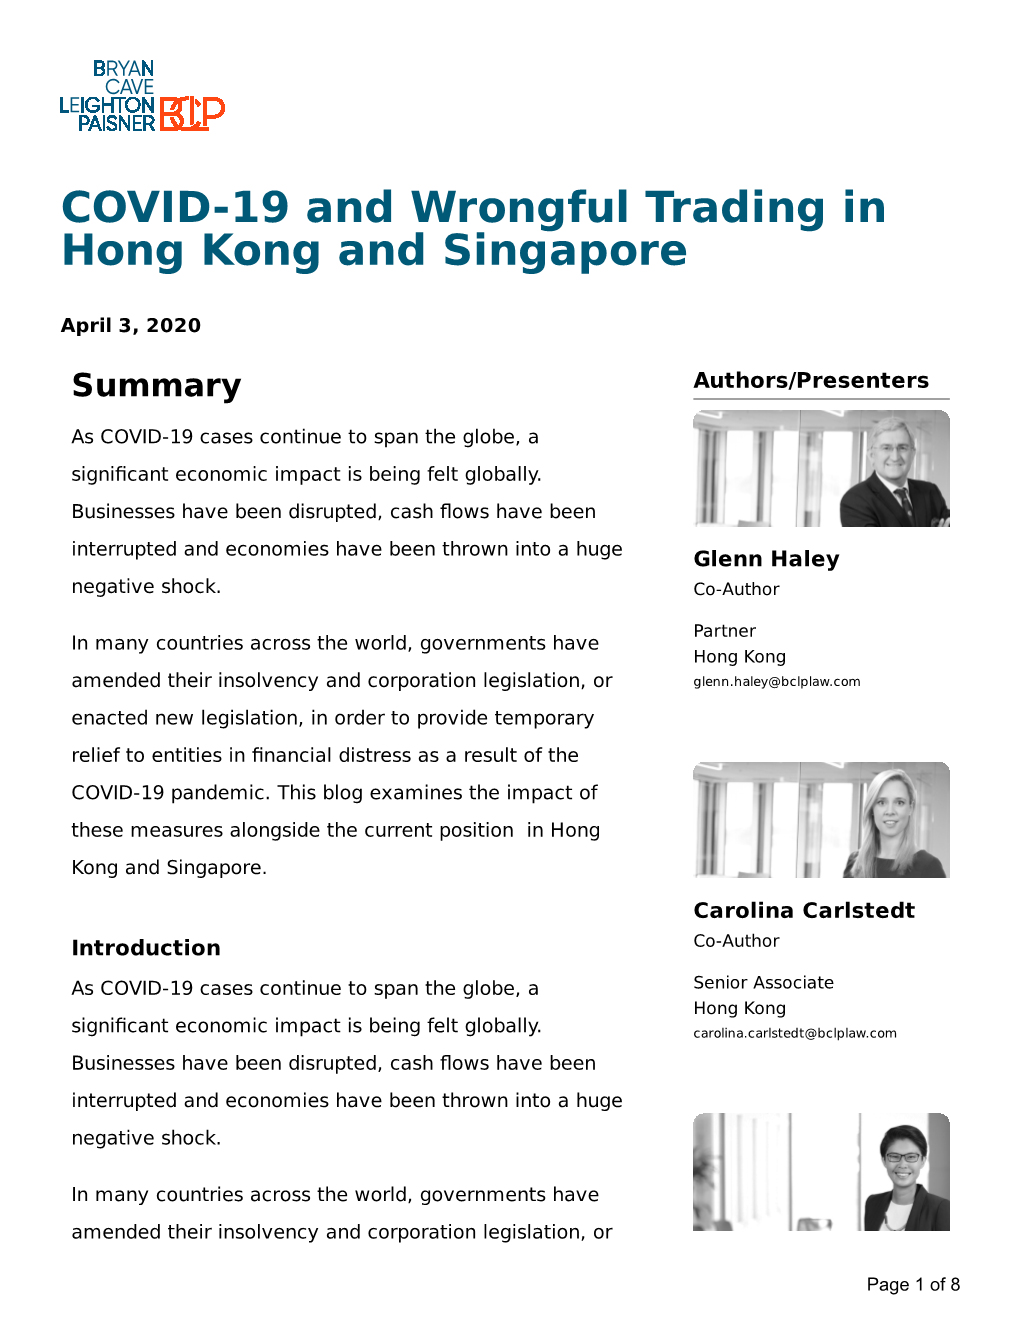 COVID-19 and Wrongful Trading in Hong Kong and Singapore